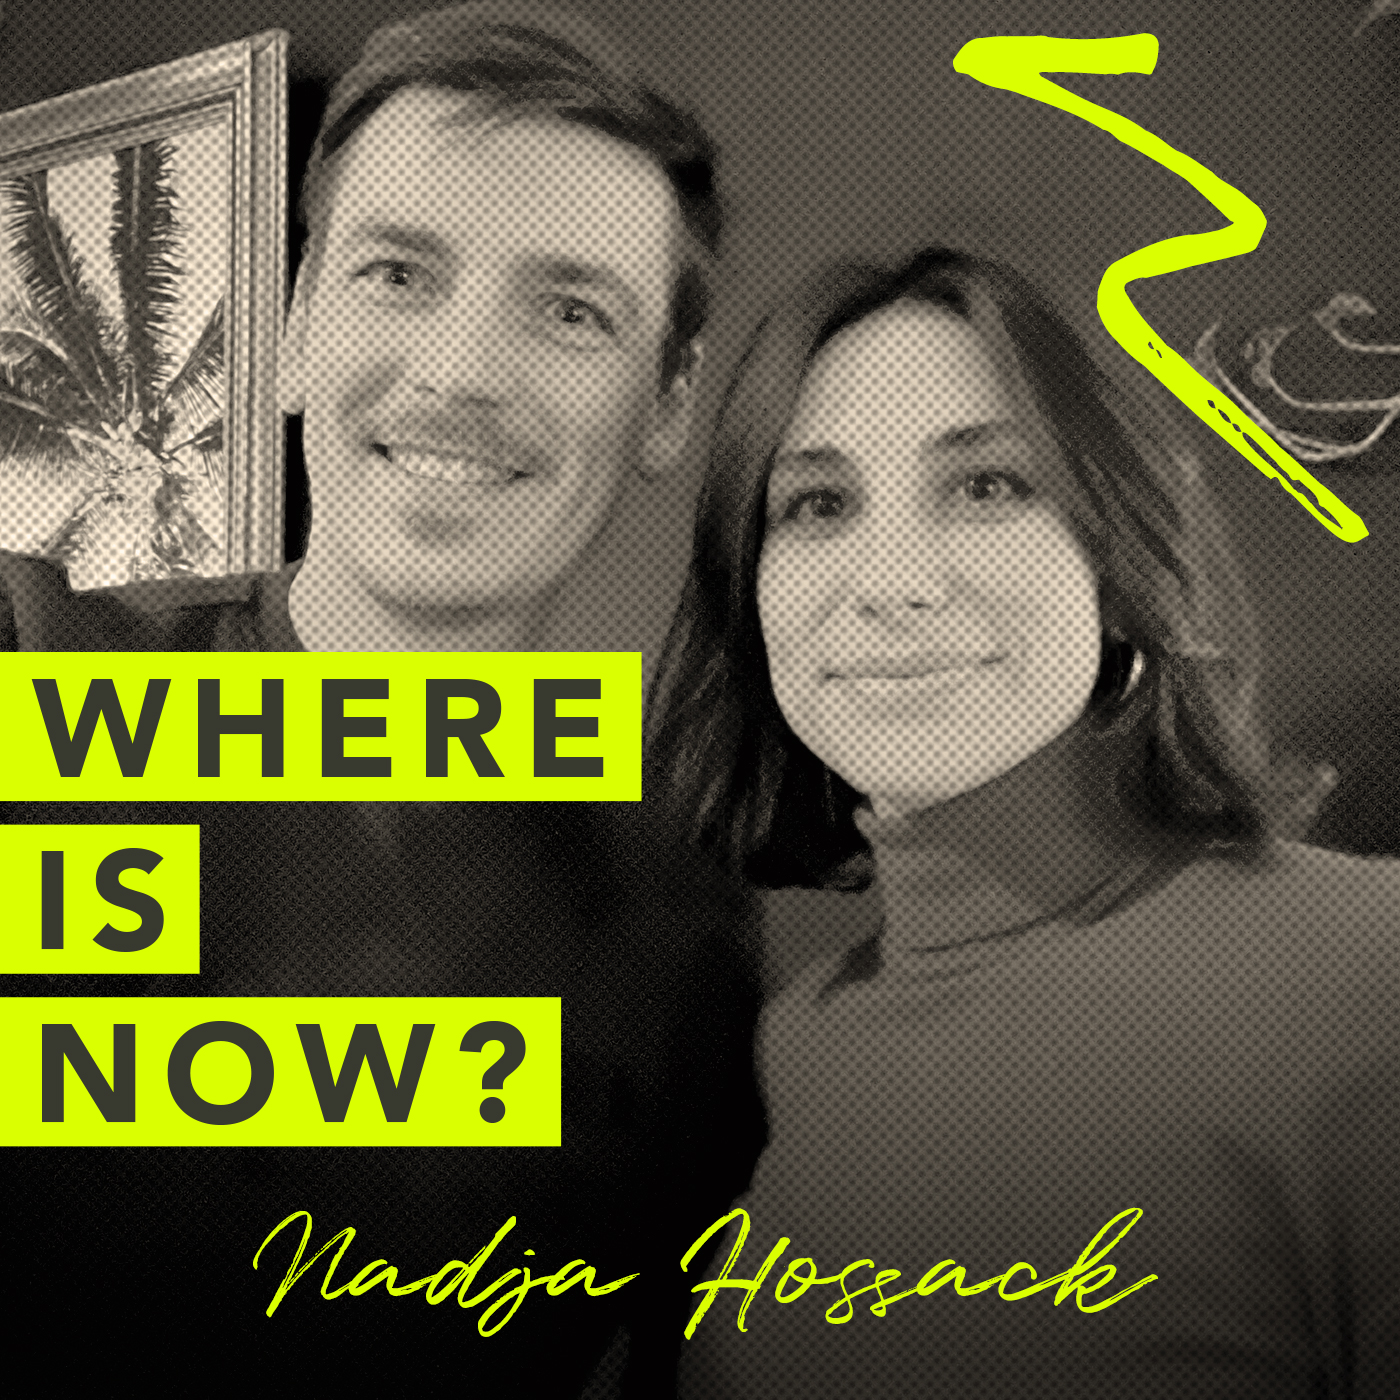 Where is now? Interview - Nadja Hossack